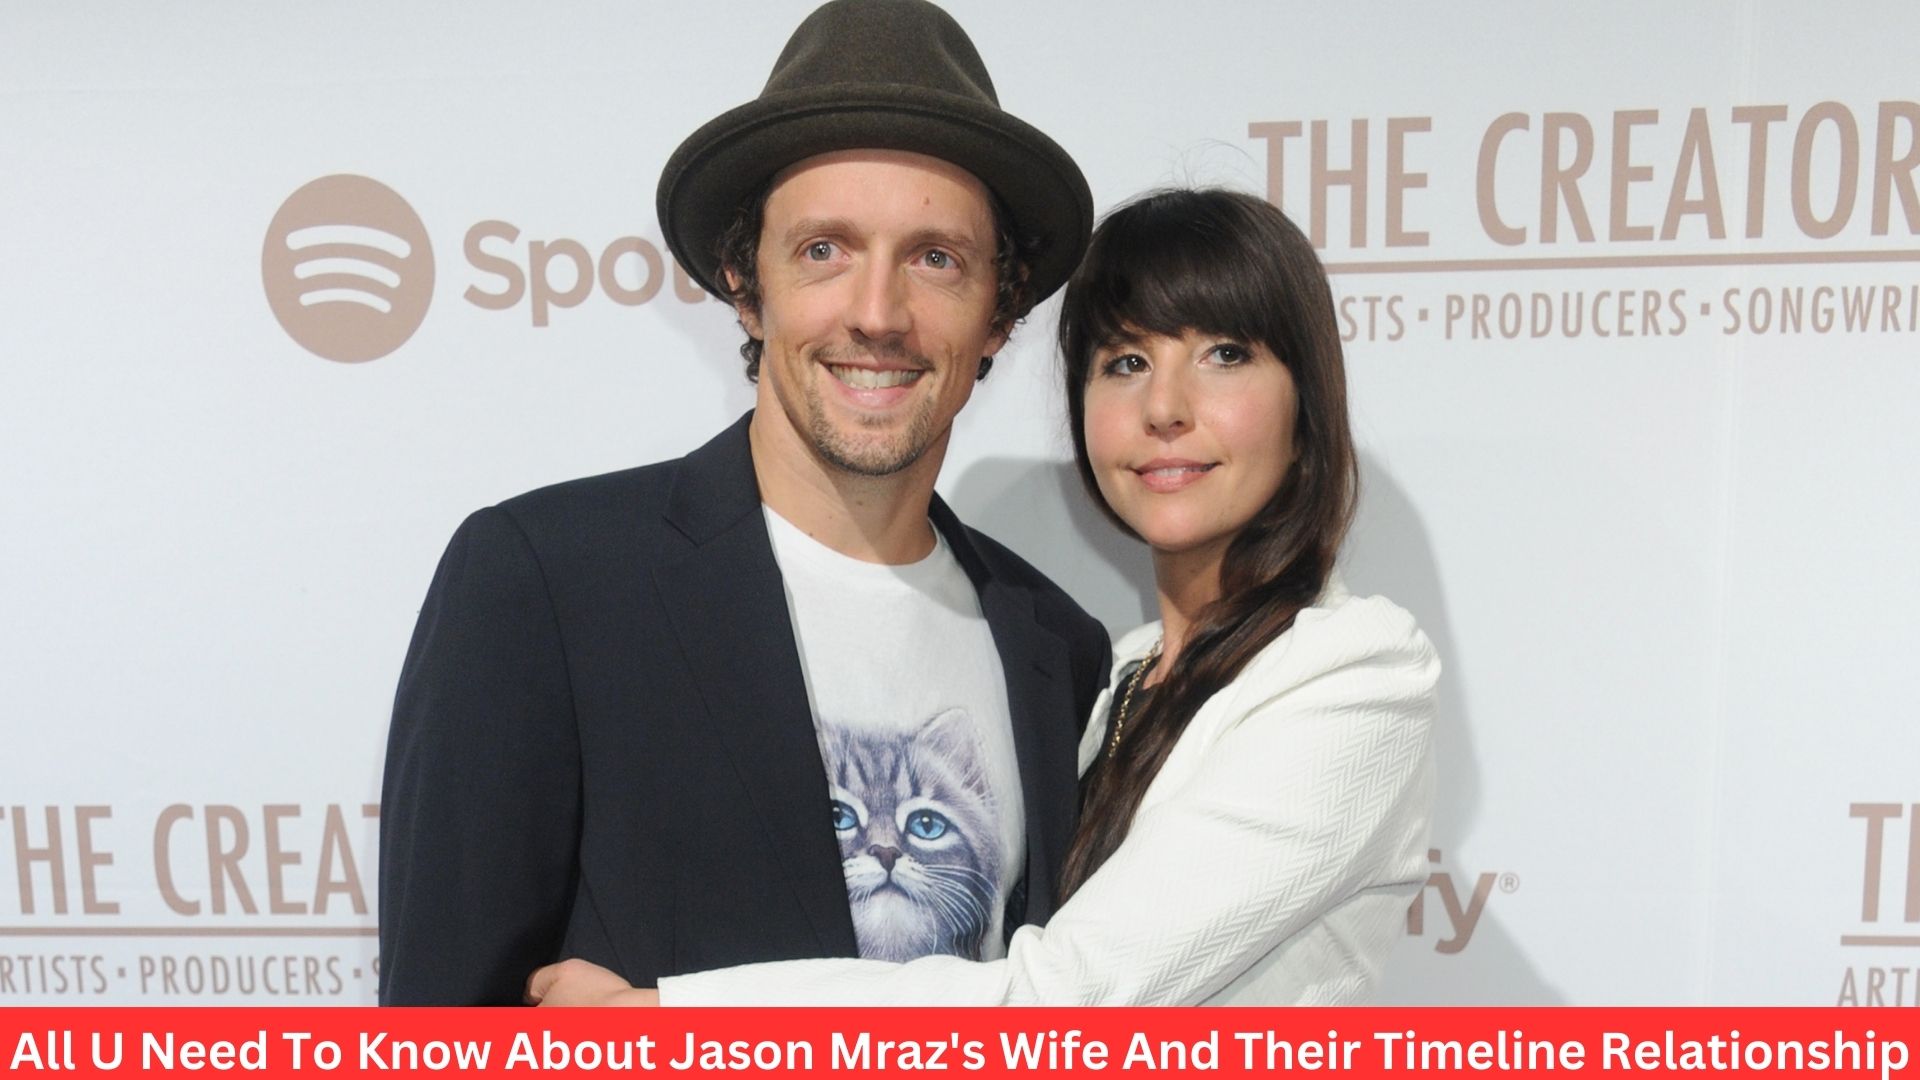 All U Need To Know About Jason Mraz's Wife And Their Timeline Relationship